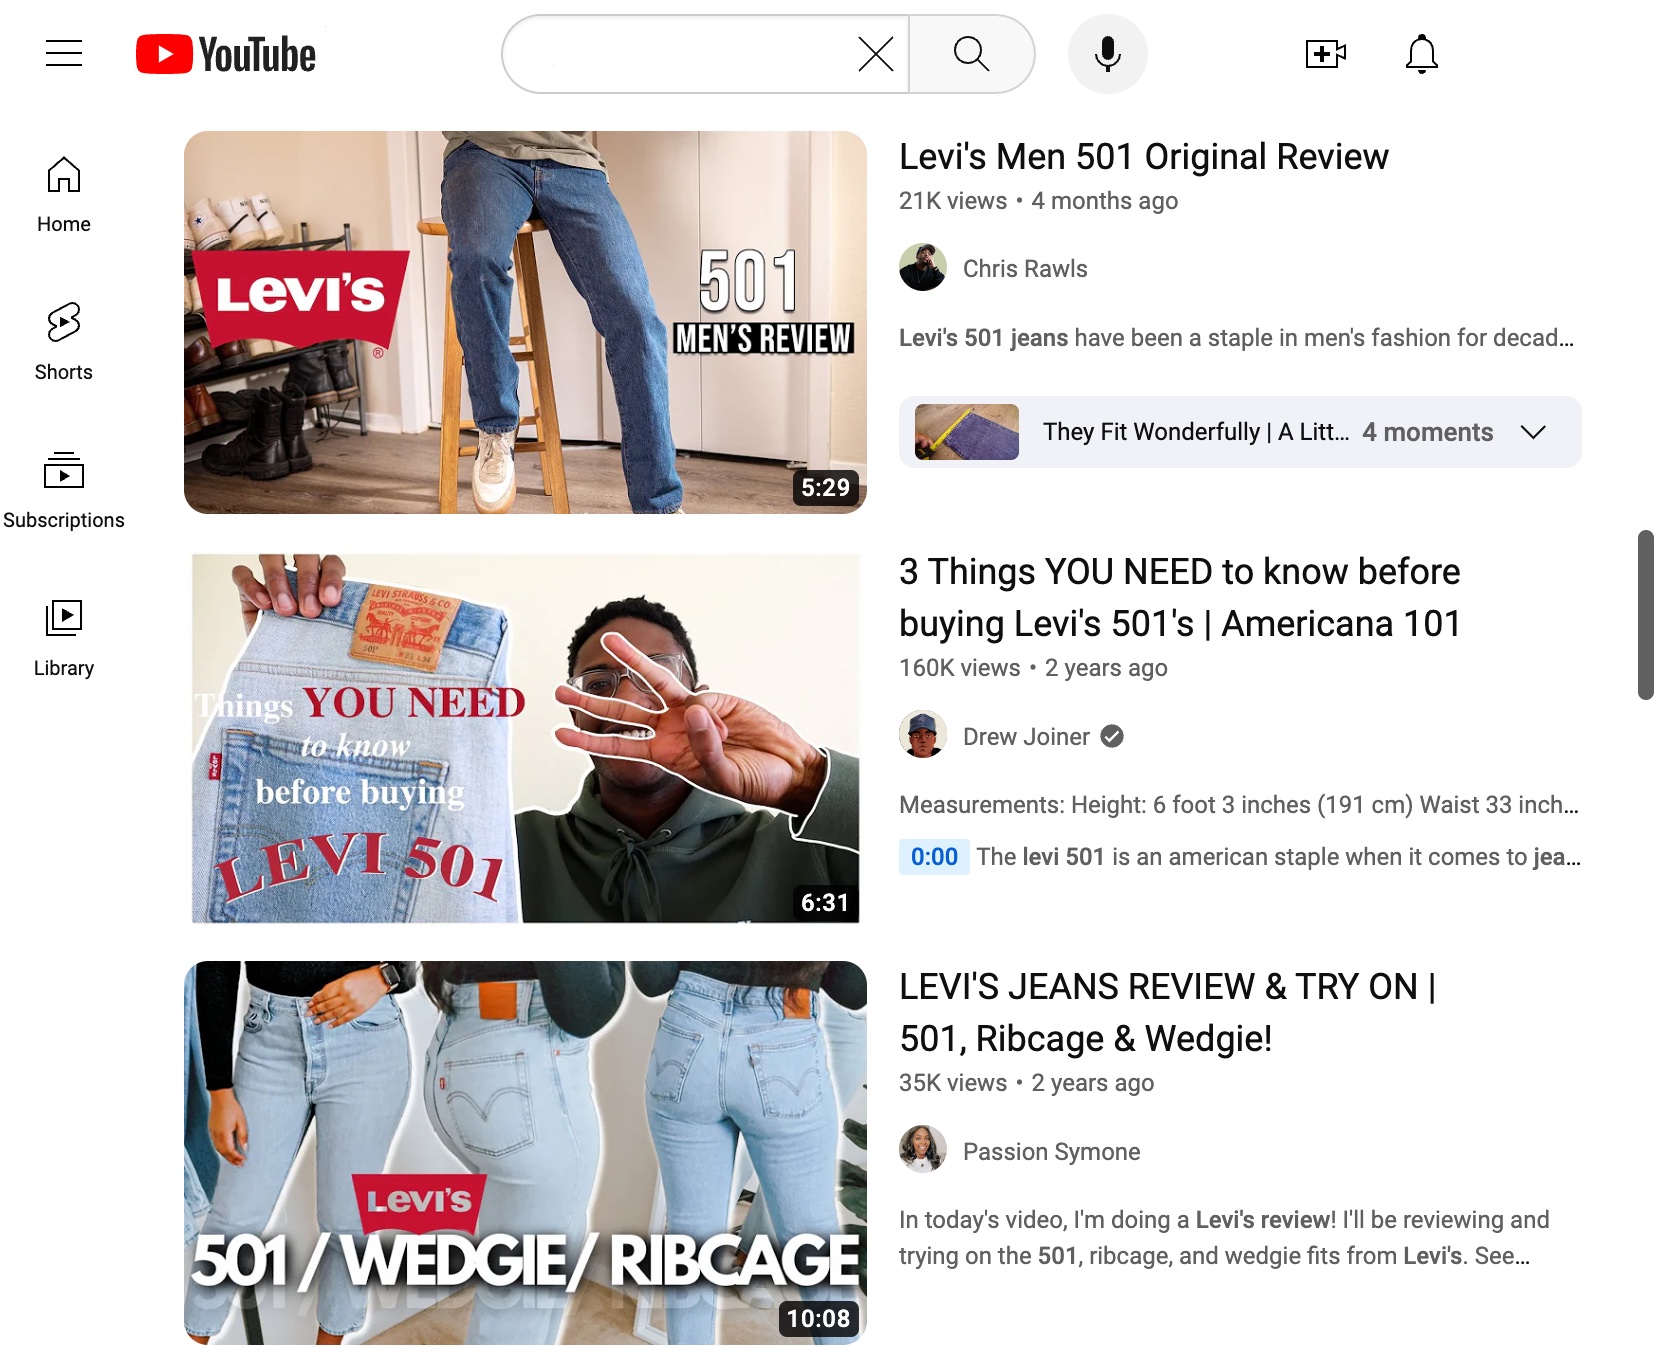 Levis reviews on YouTube